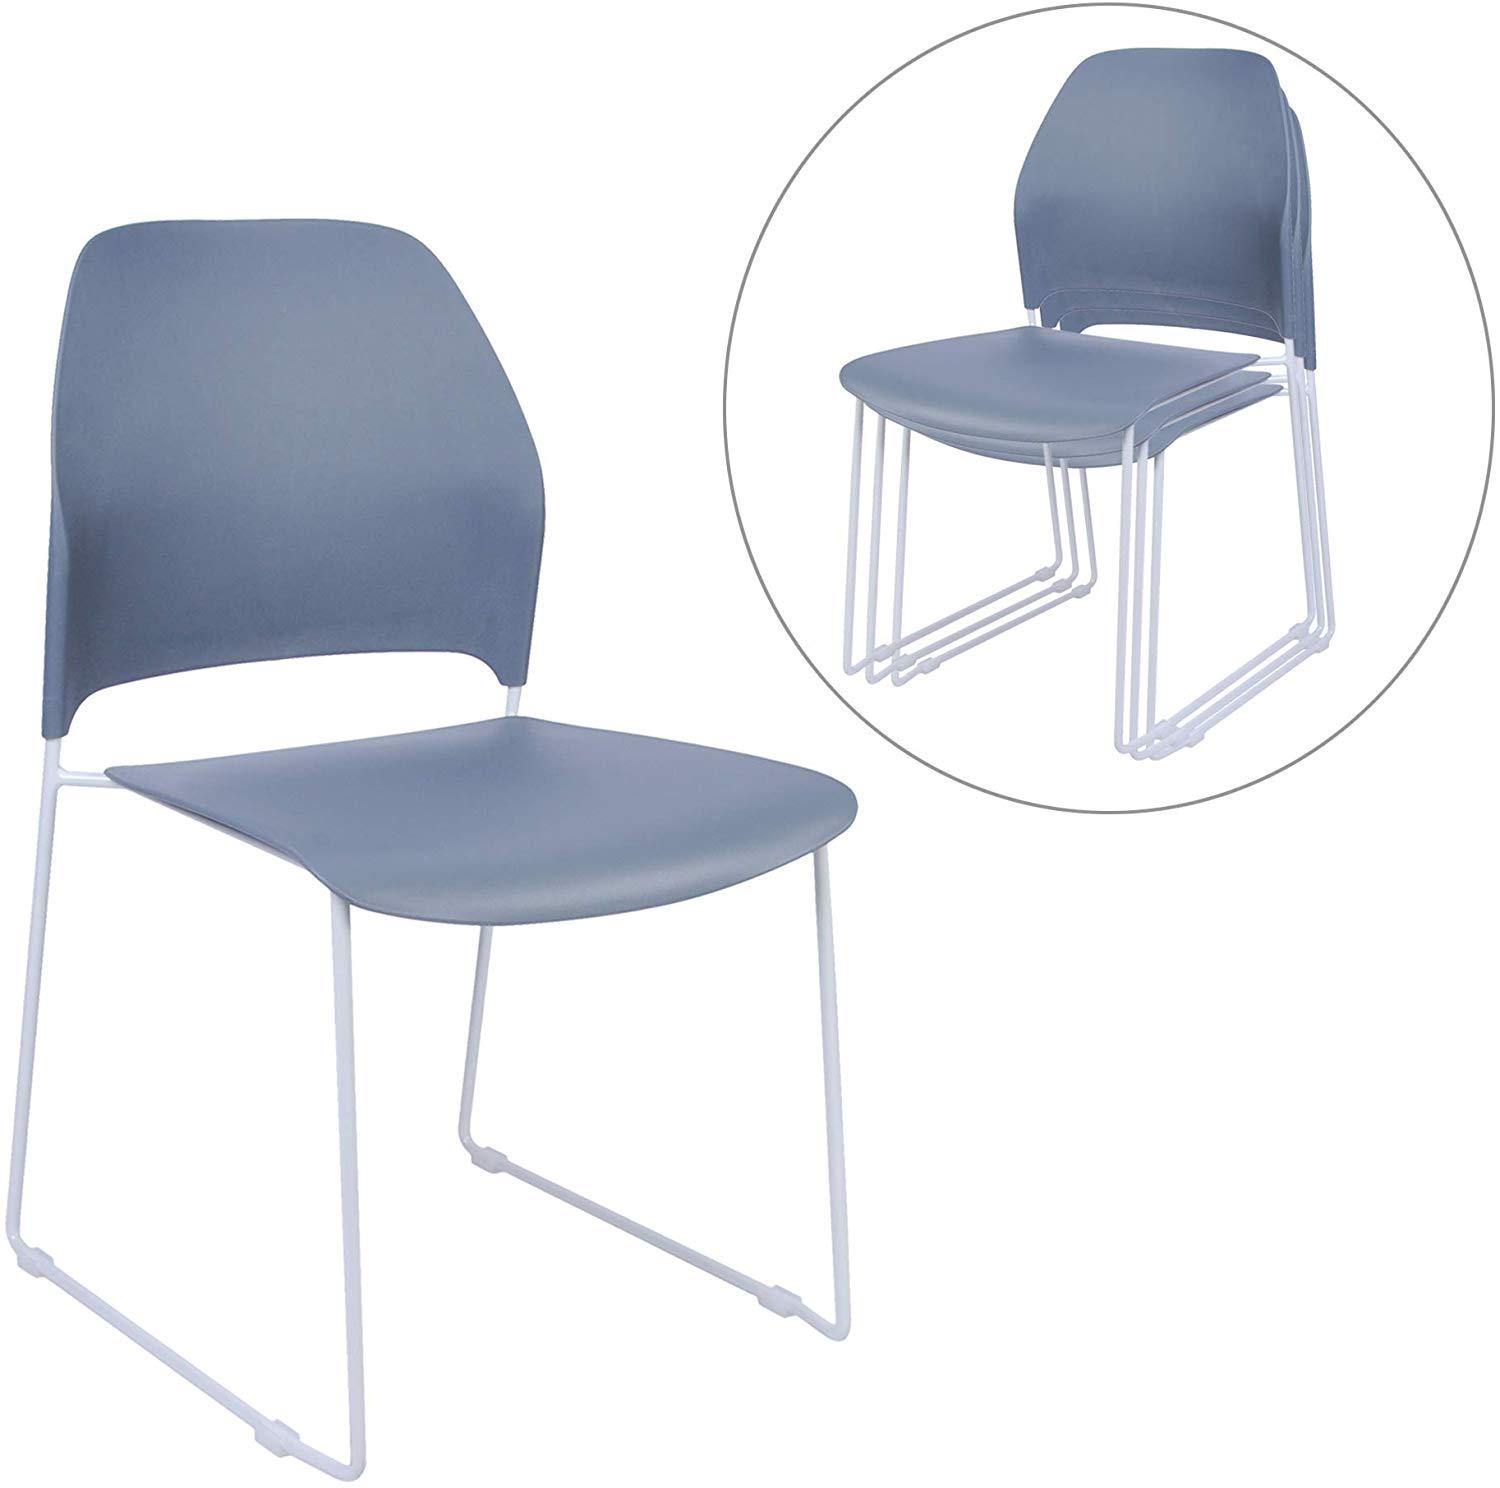 Lightweight Plastic School Stack Chair with Back Ultra-Compact Armless Office Desk Chair for Work Study Dining Gray (Set of 4) - Bosonshop